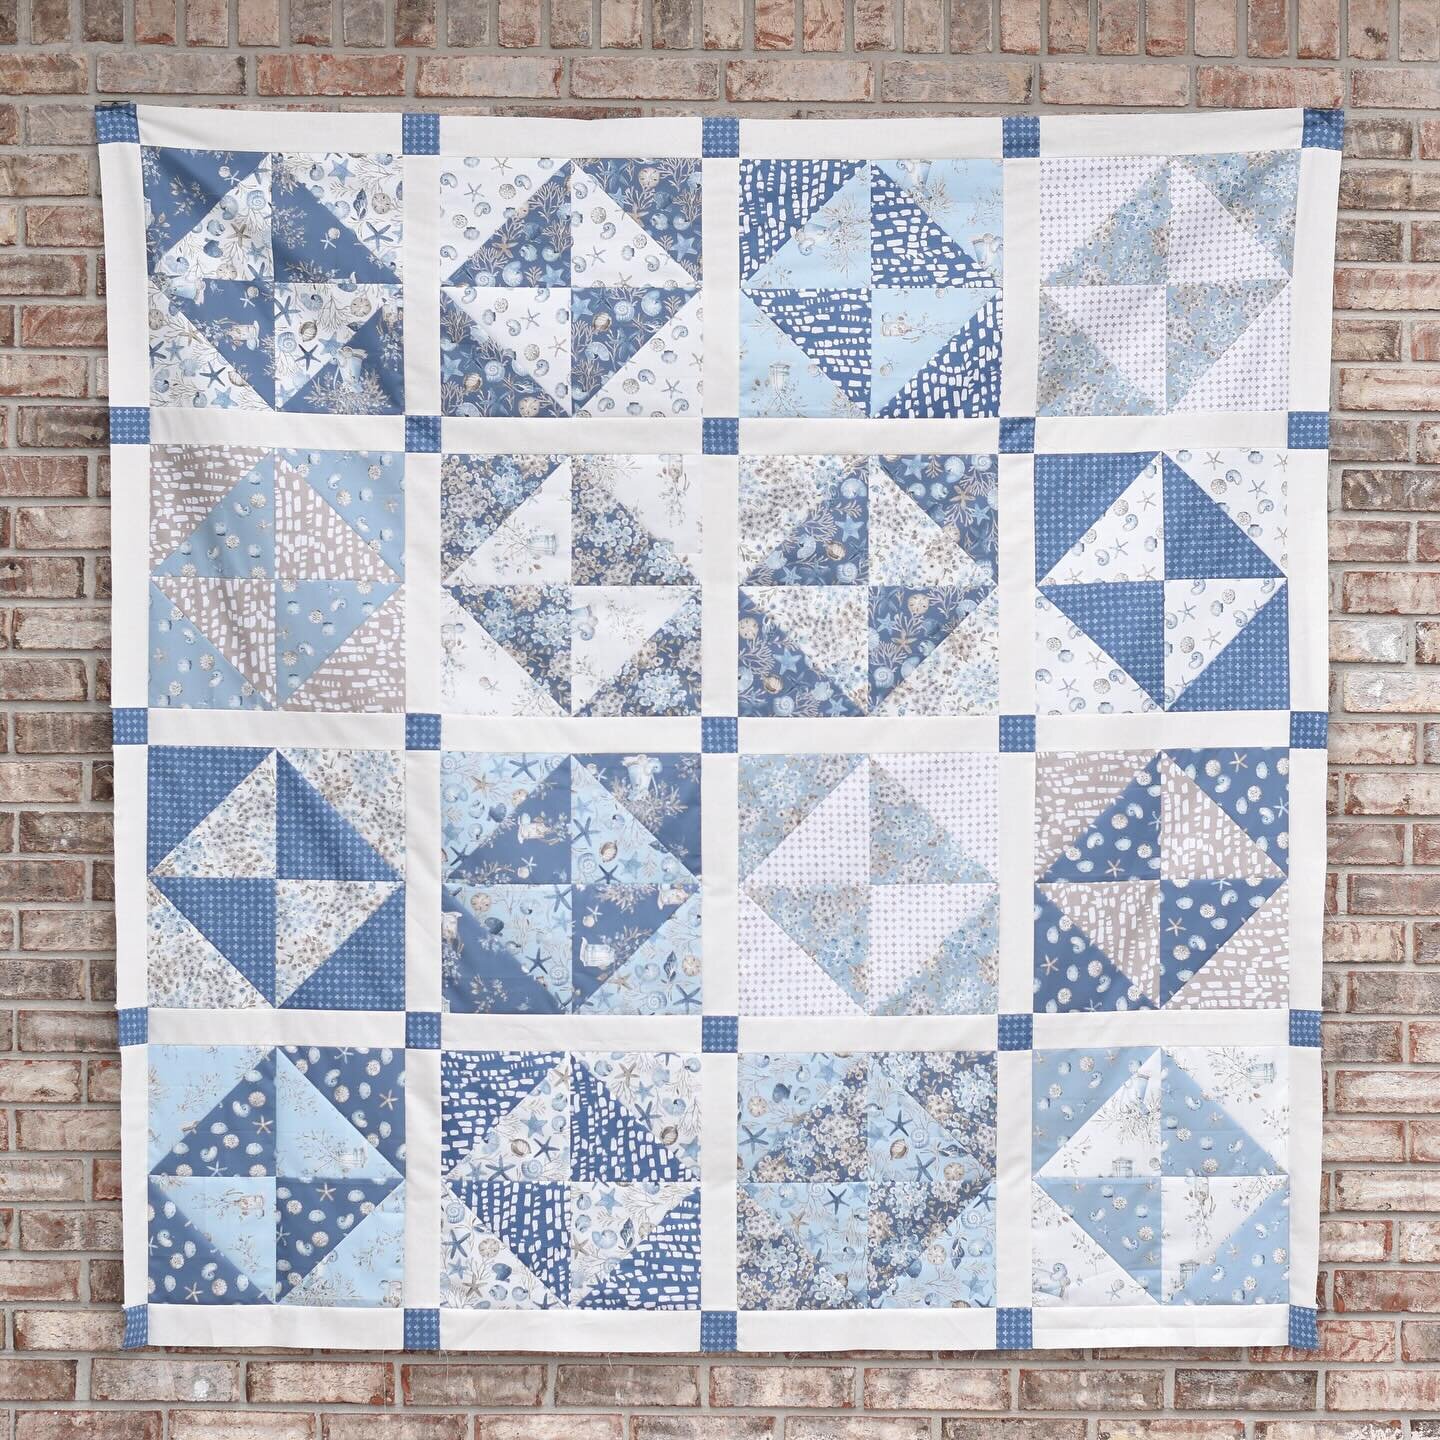 I am IN LOVE with this new fabric collection by @lisaauditart swipe ➡️ to take a closer look.

Check out my blog for the tutorial of this fat quarter friendly pattern! 

Fabric: Blue Escape Coastal by @lisaauditart for @rileyblakedesigns 

Pattern: D